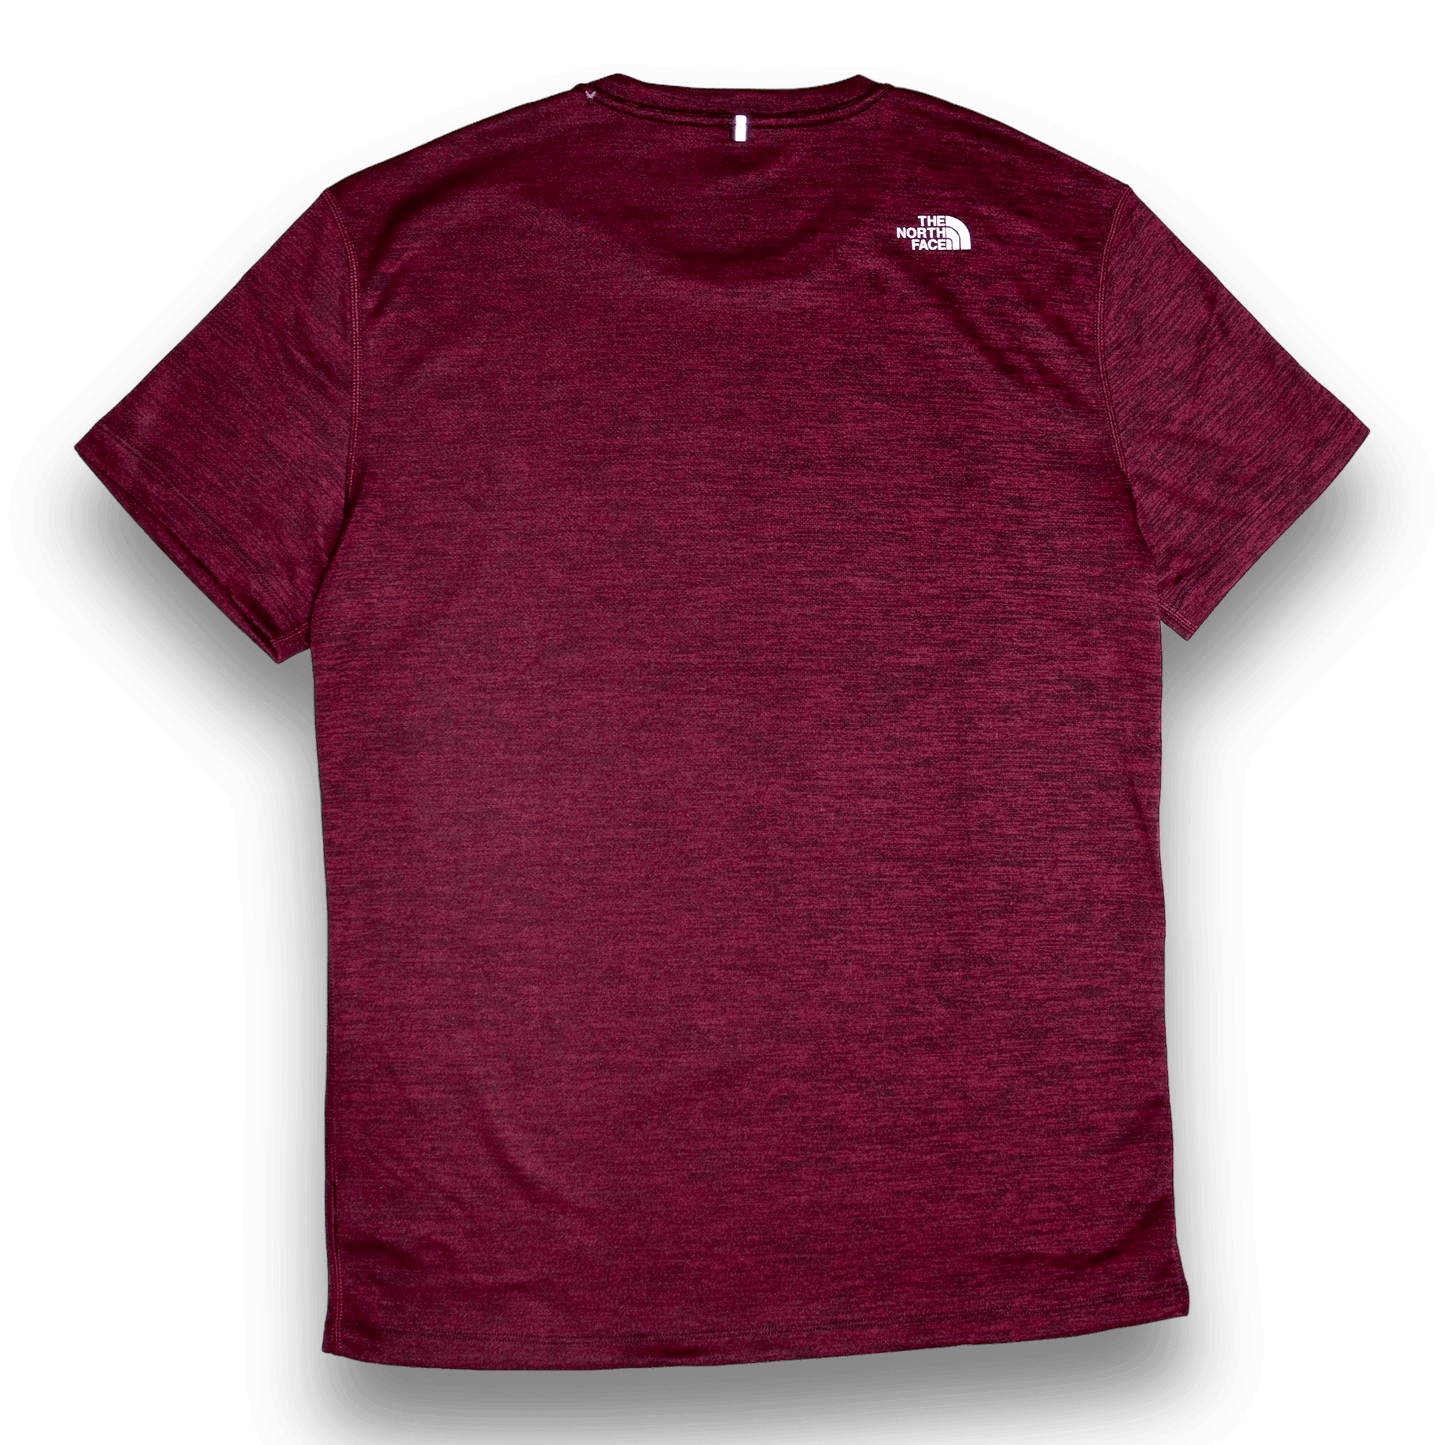 The North Face Men's Merino Wool EX Short Sleeve Round T-Shirt - Apparel For Less